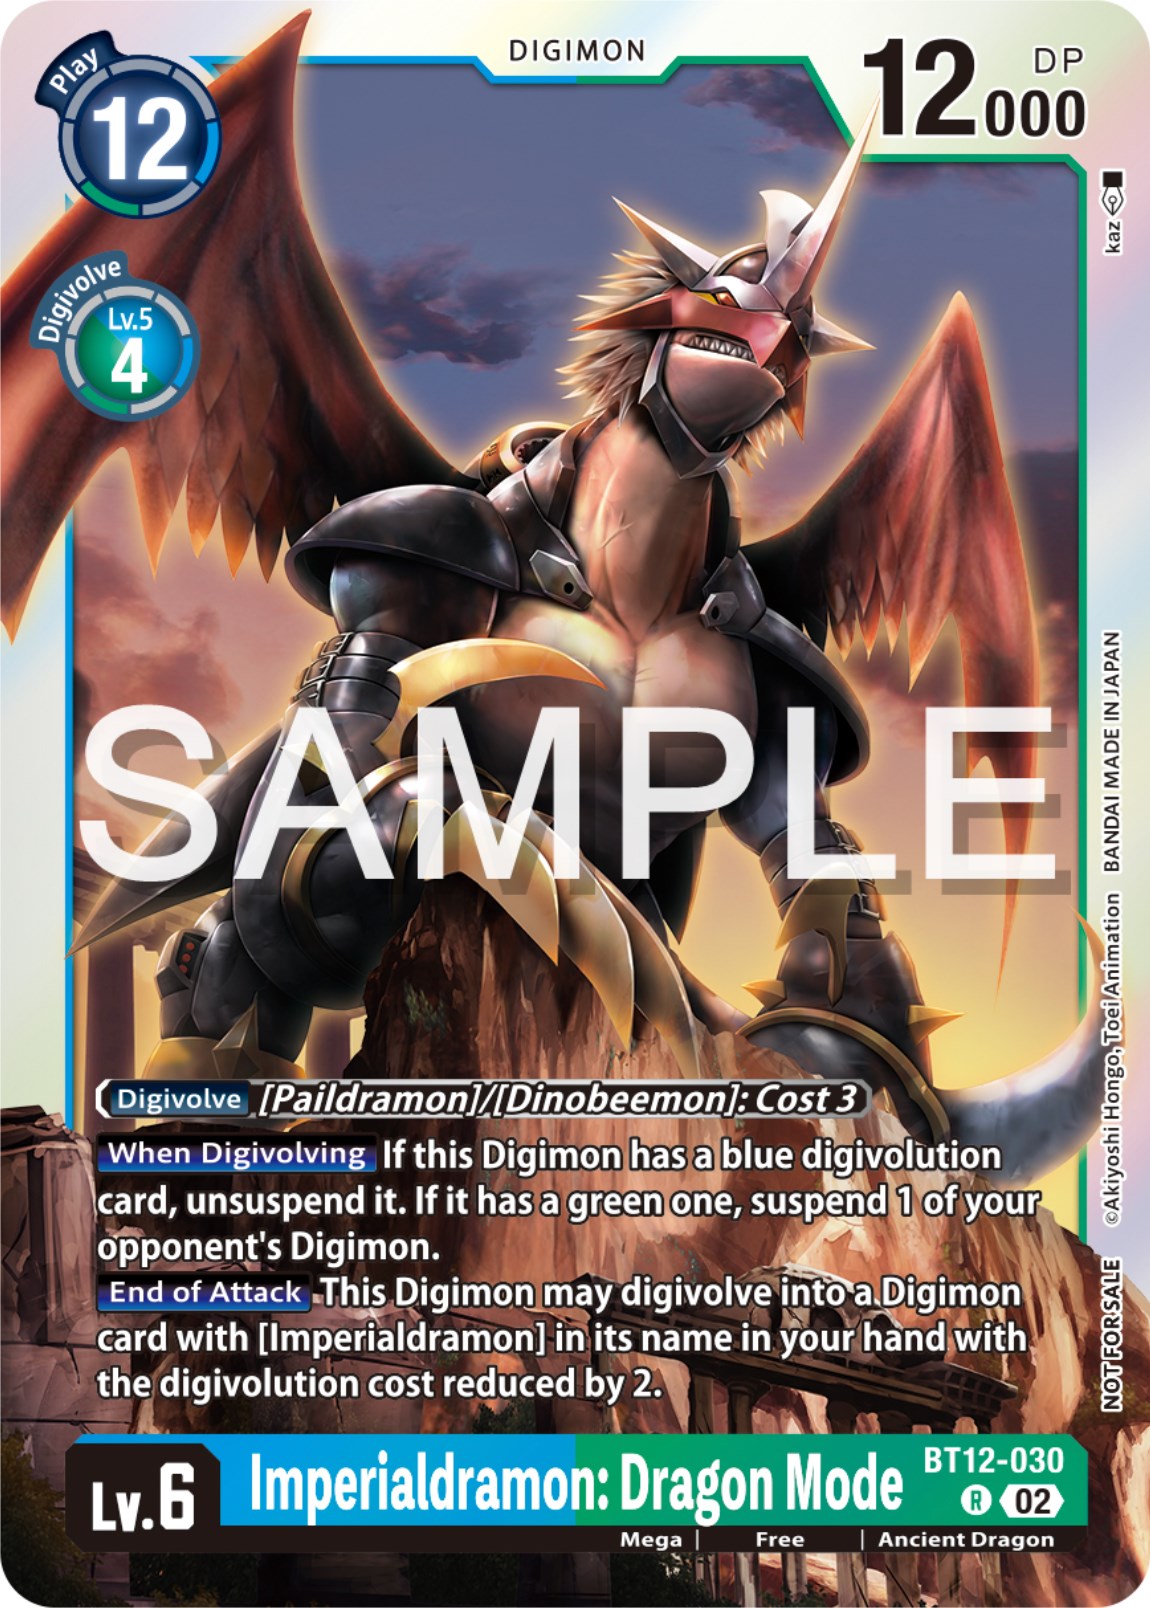 Imperialdramon: Dragon Mode [BT12-030] (Event Pack 6) [Across Time Promos] | Viridian Forest